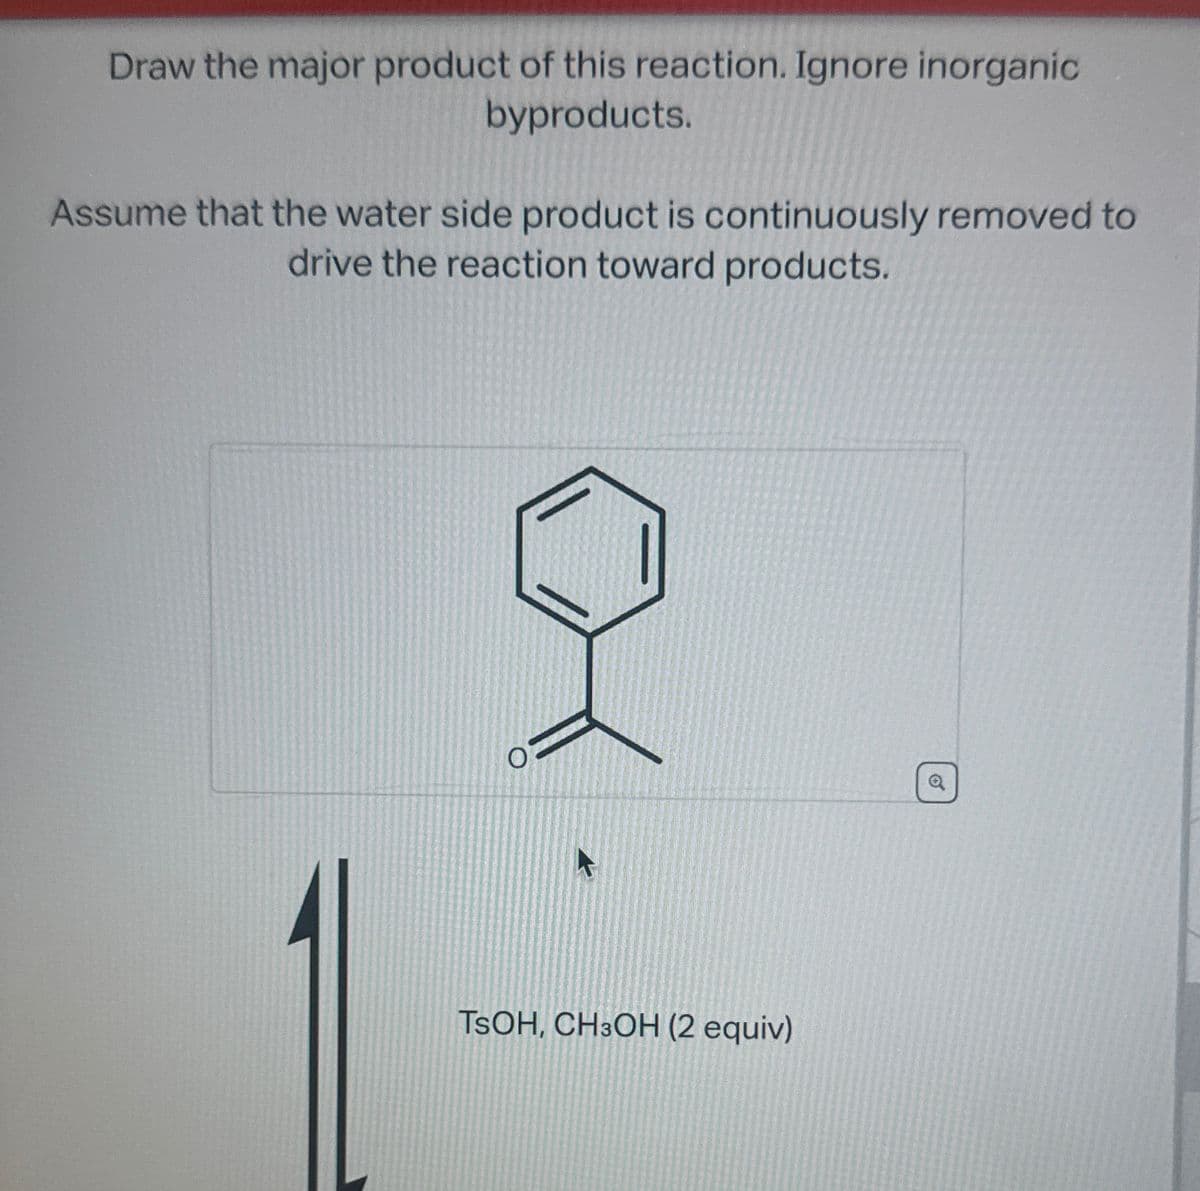 Draw the major product of this reaction. Ignore inorganic
byproducts.
Assume that the water side product is continuously removed to
drive the reaction toward products.
TSOH, CH3OH (2 equiv)